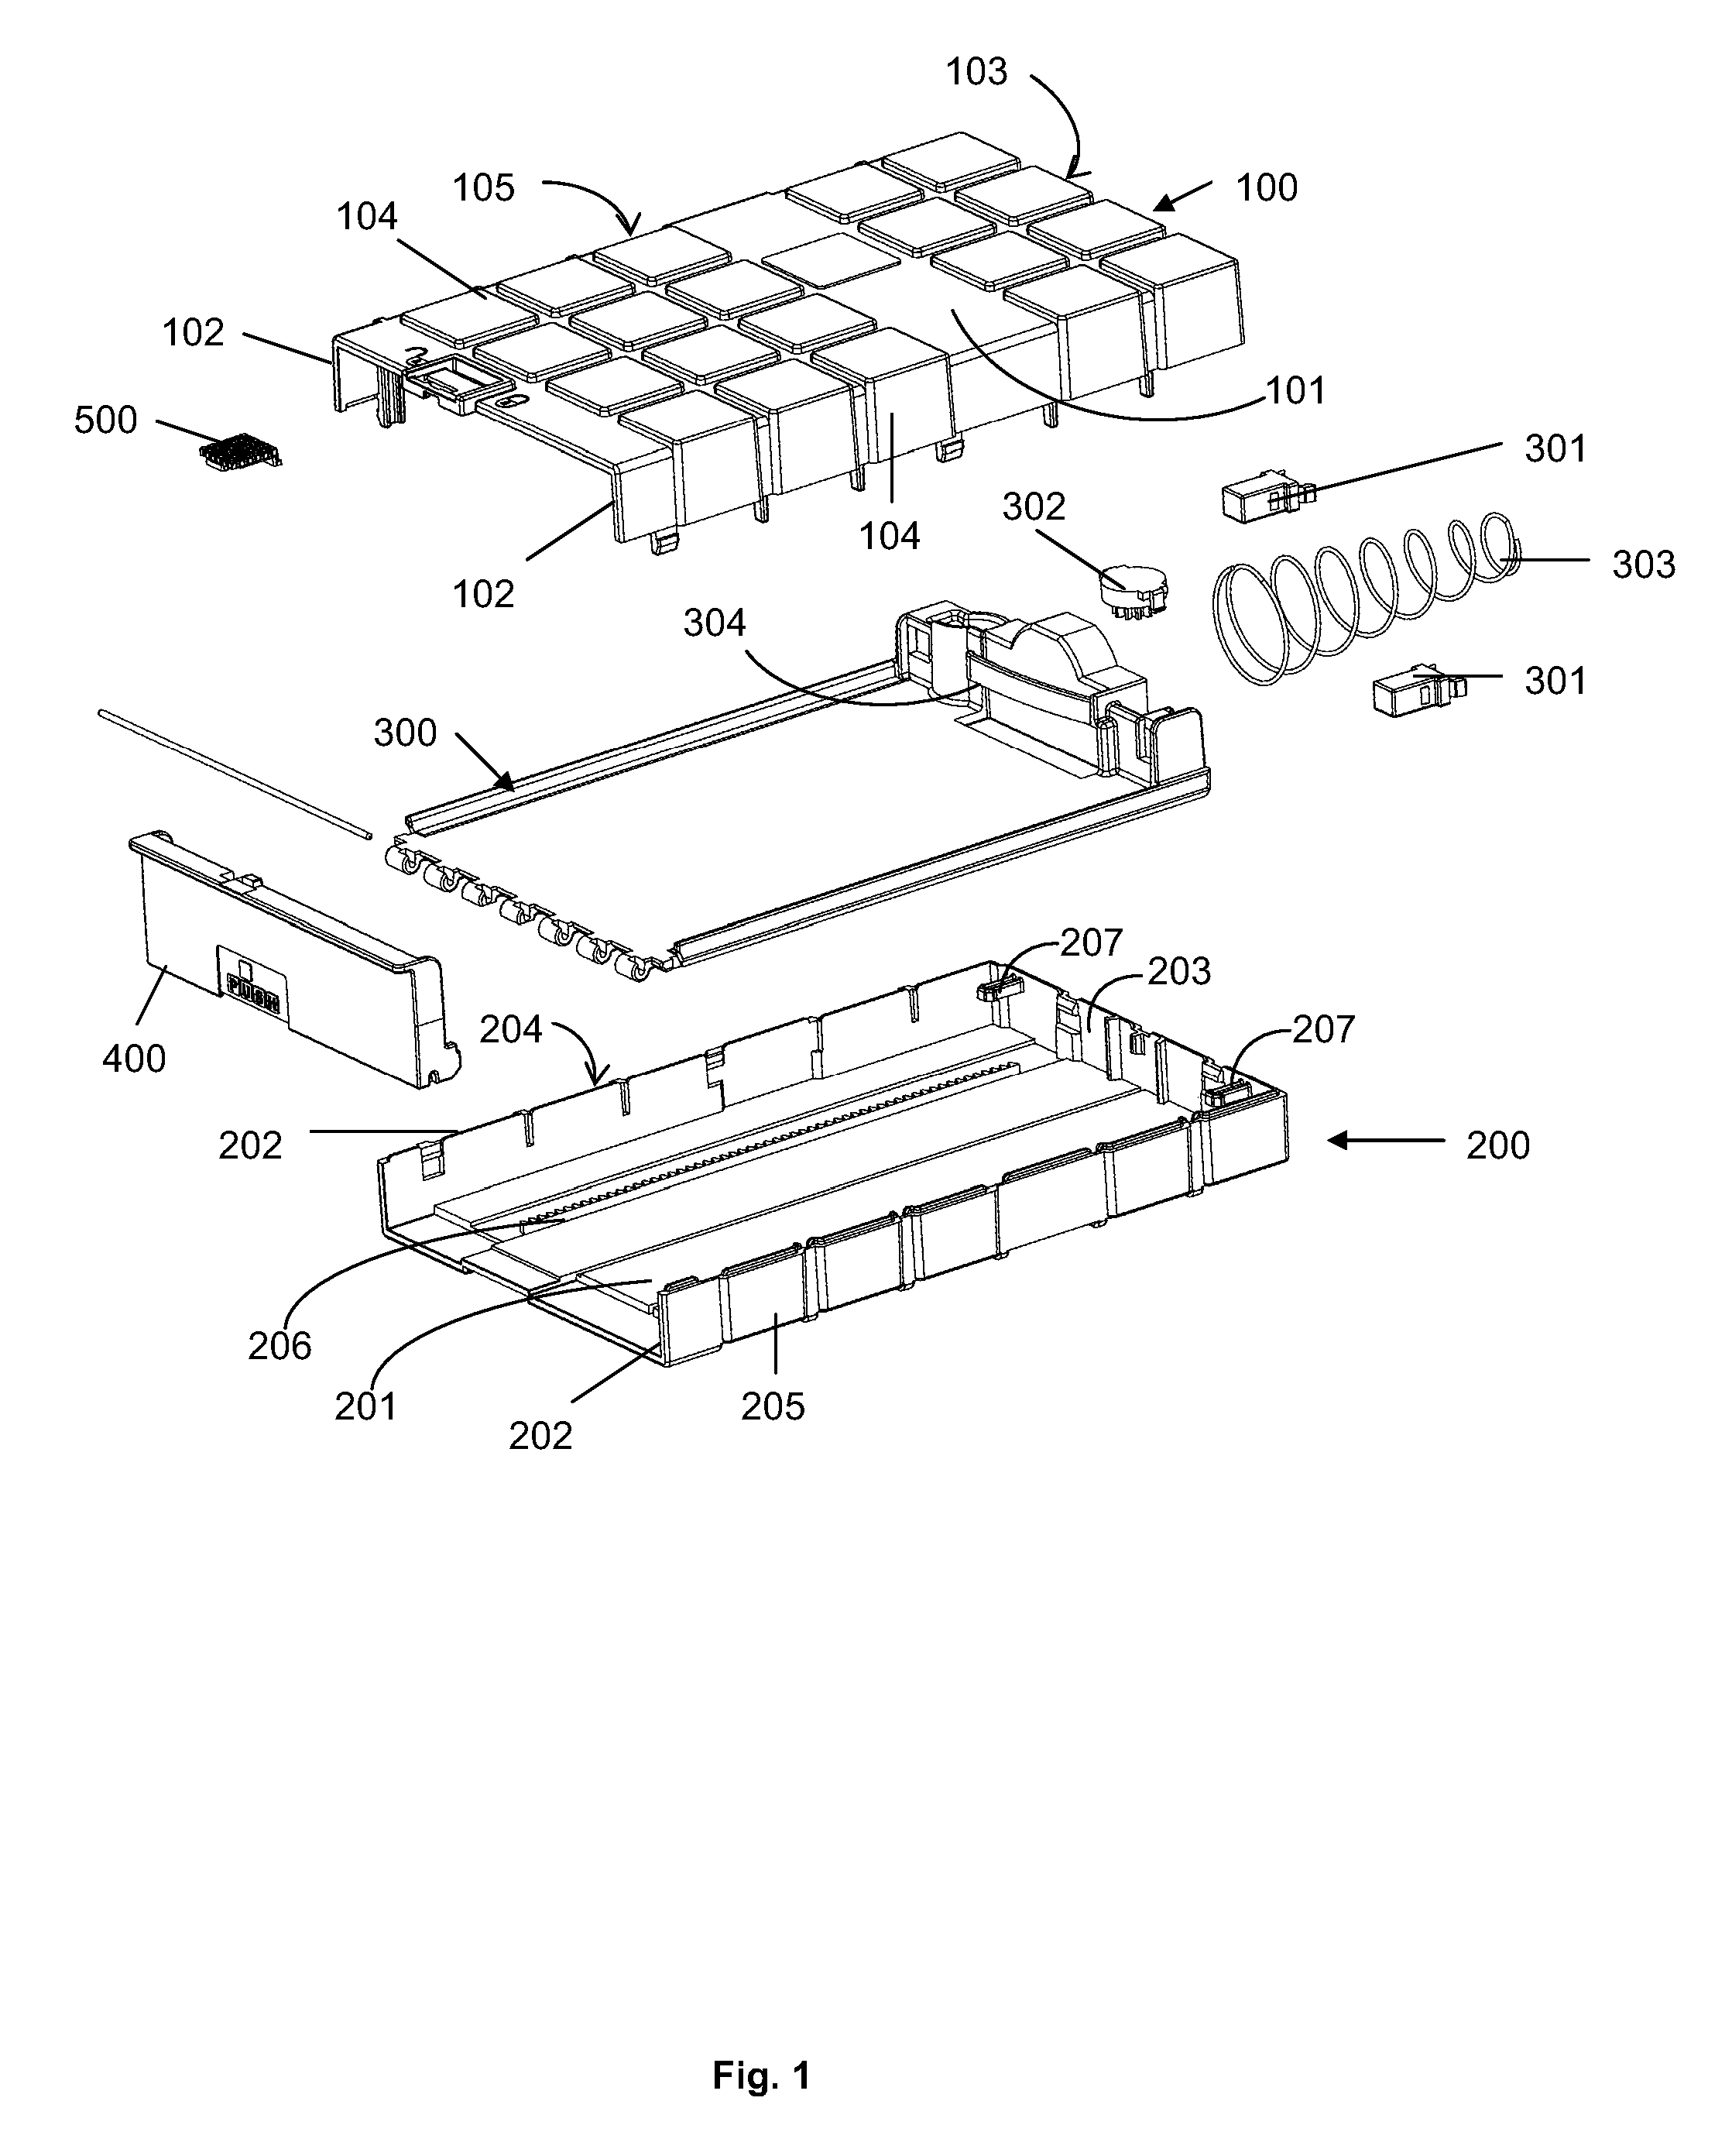 Container Assembly for Storing Peripheral Computer Memory Devices